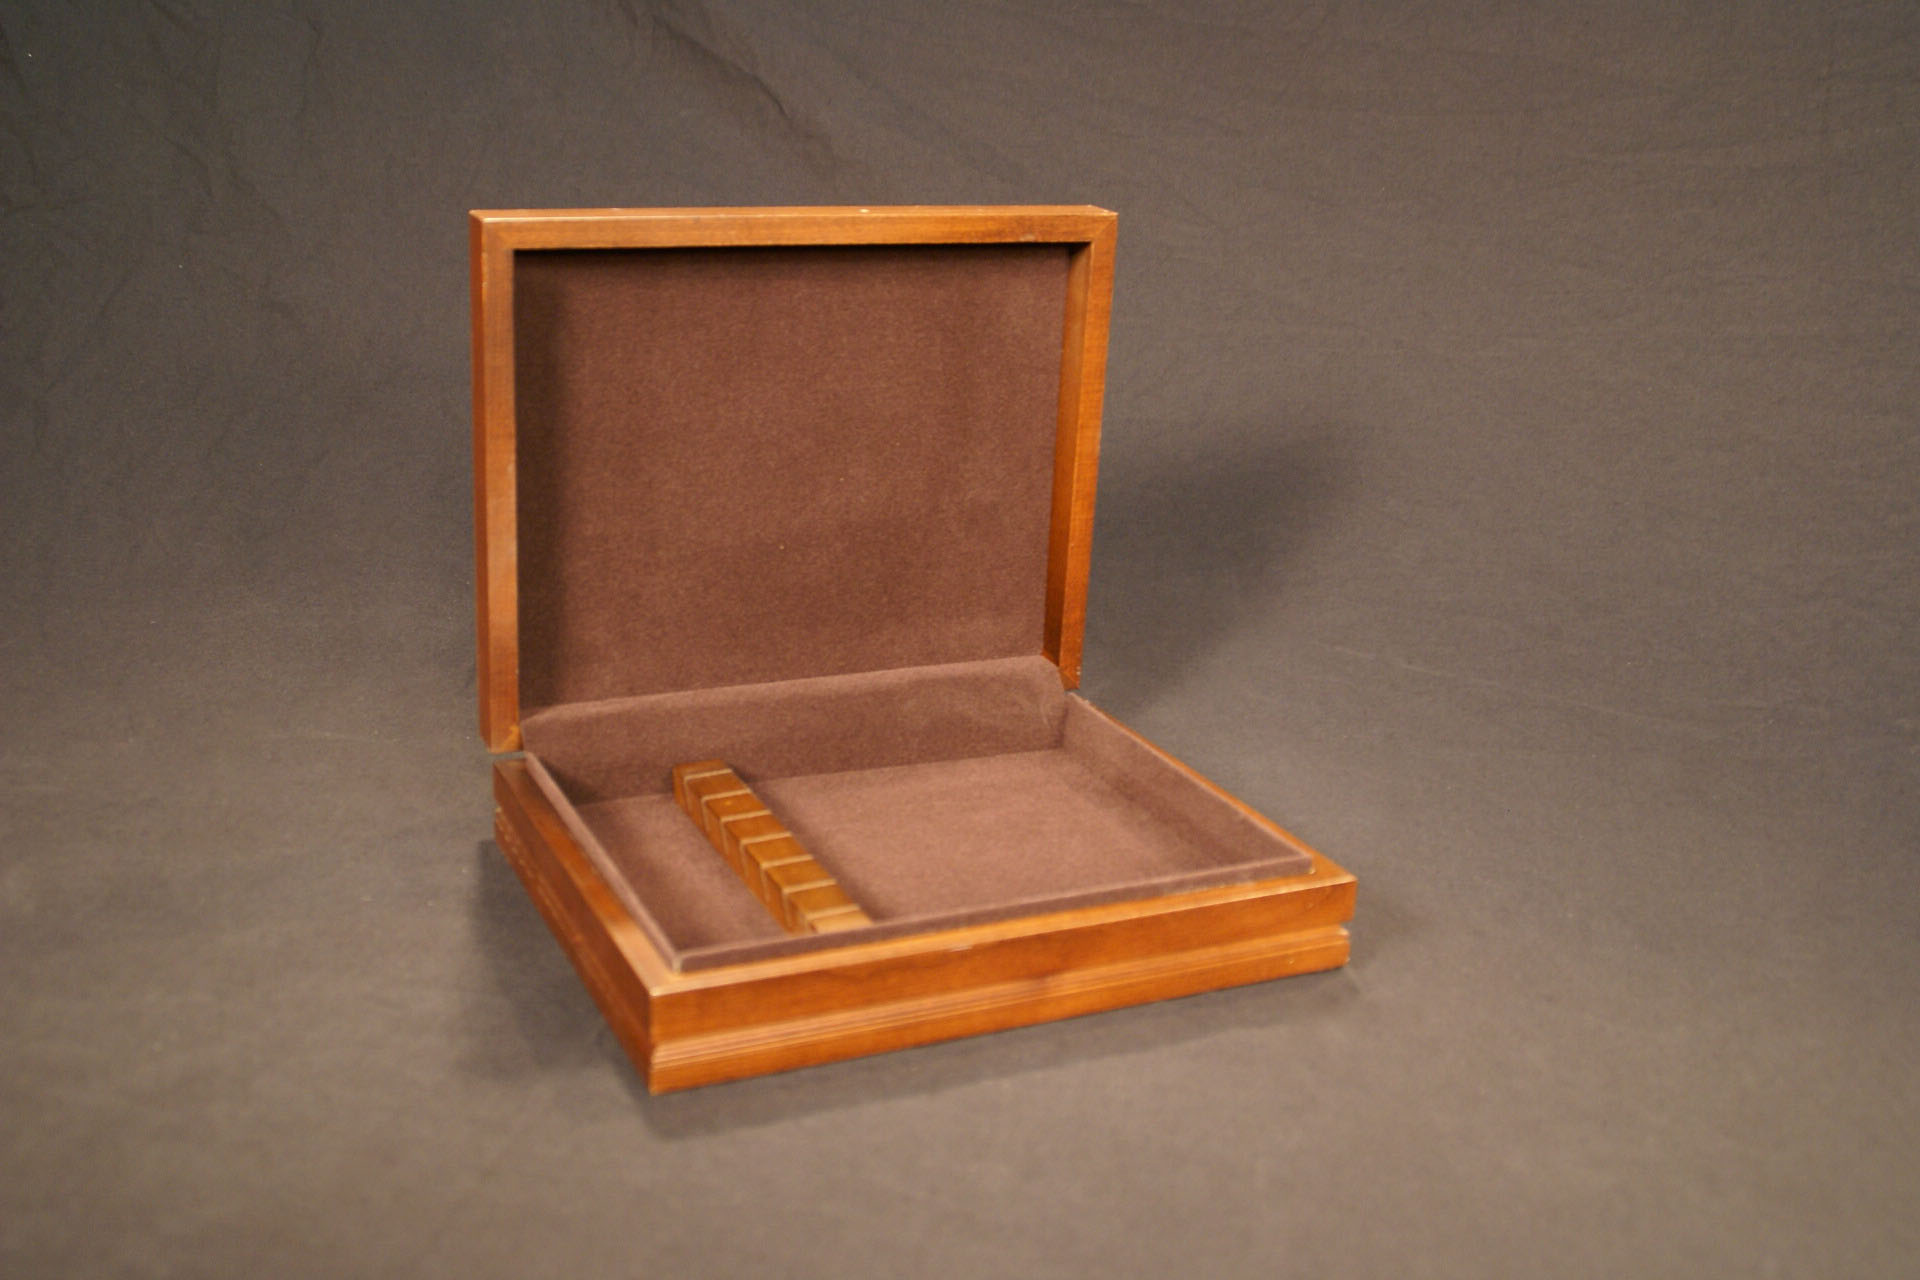 Custom Wood Box with Hinged Top and Inserts